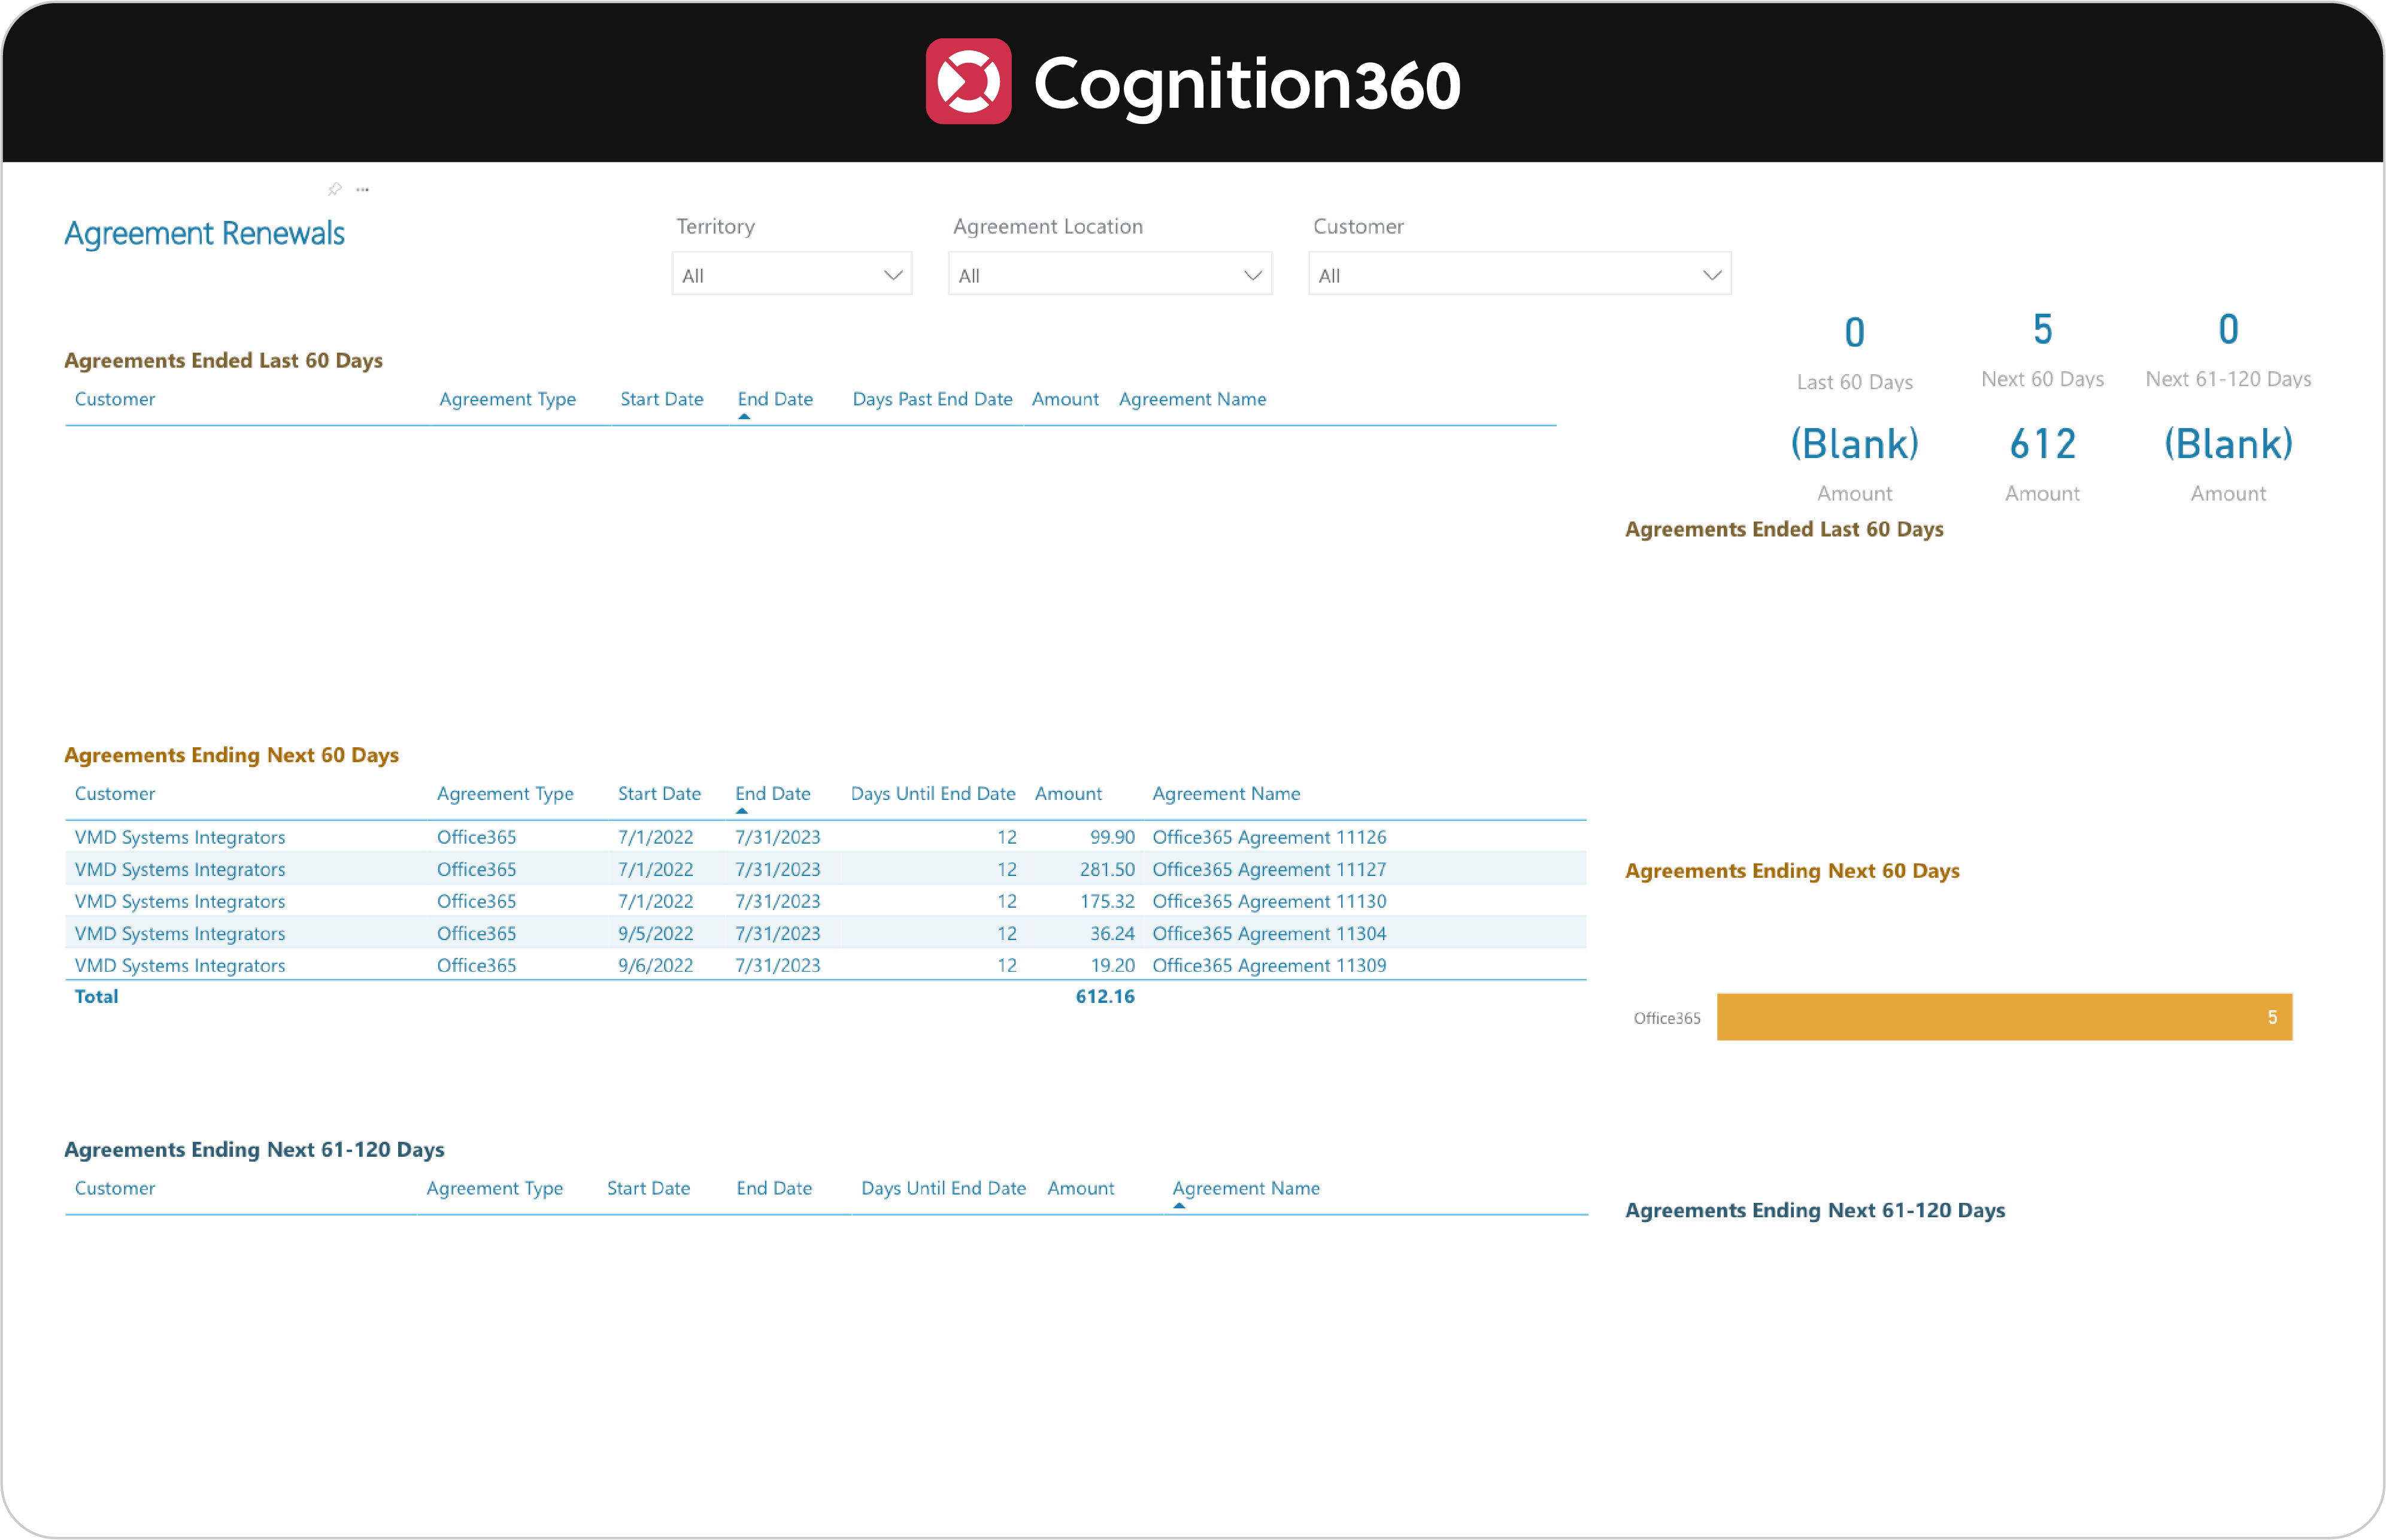 Cognition360 Agreement Renewal dashboard